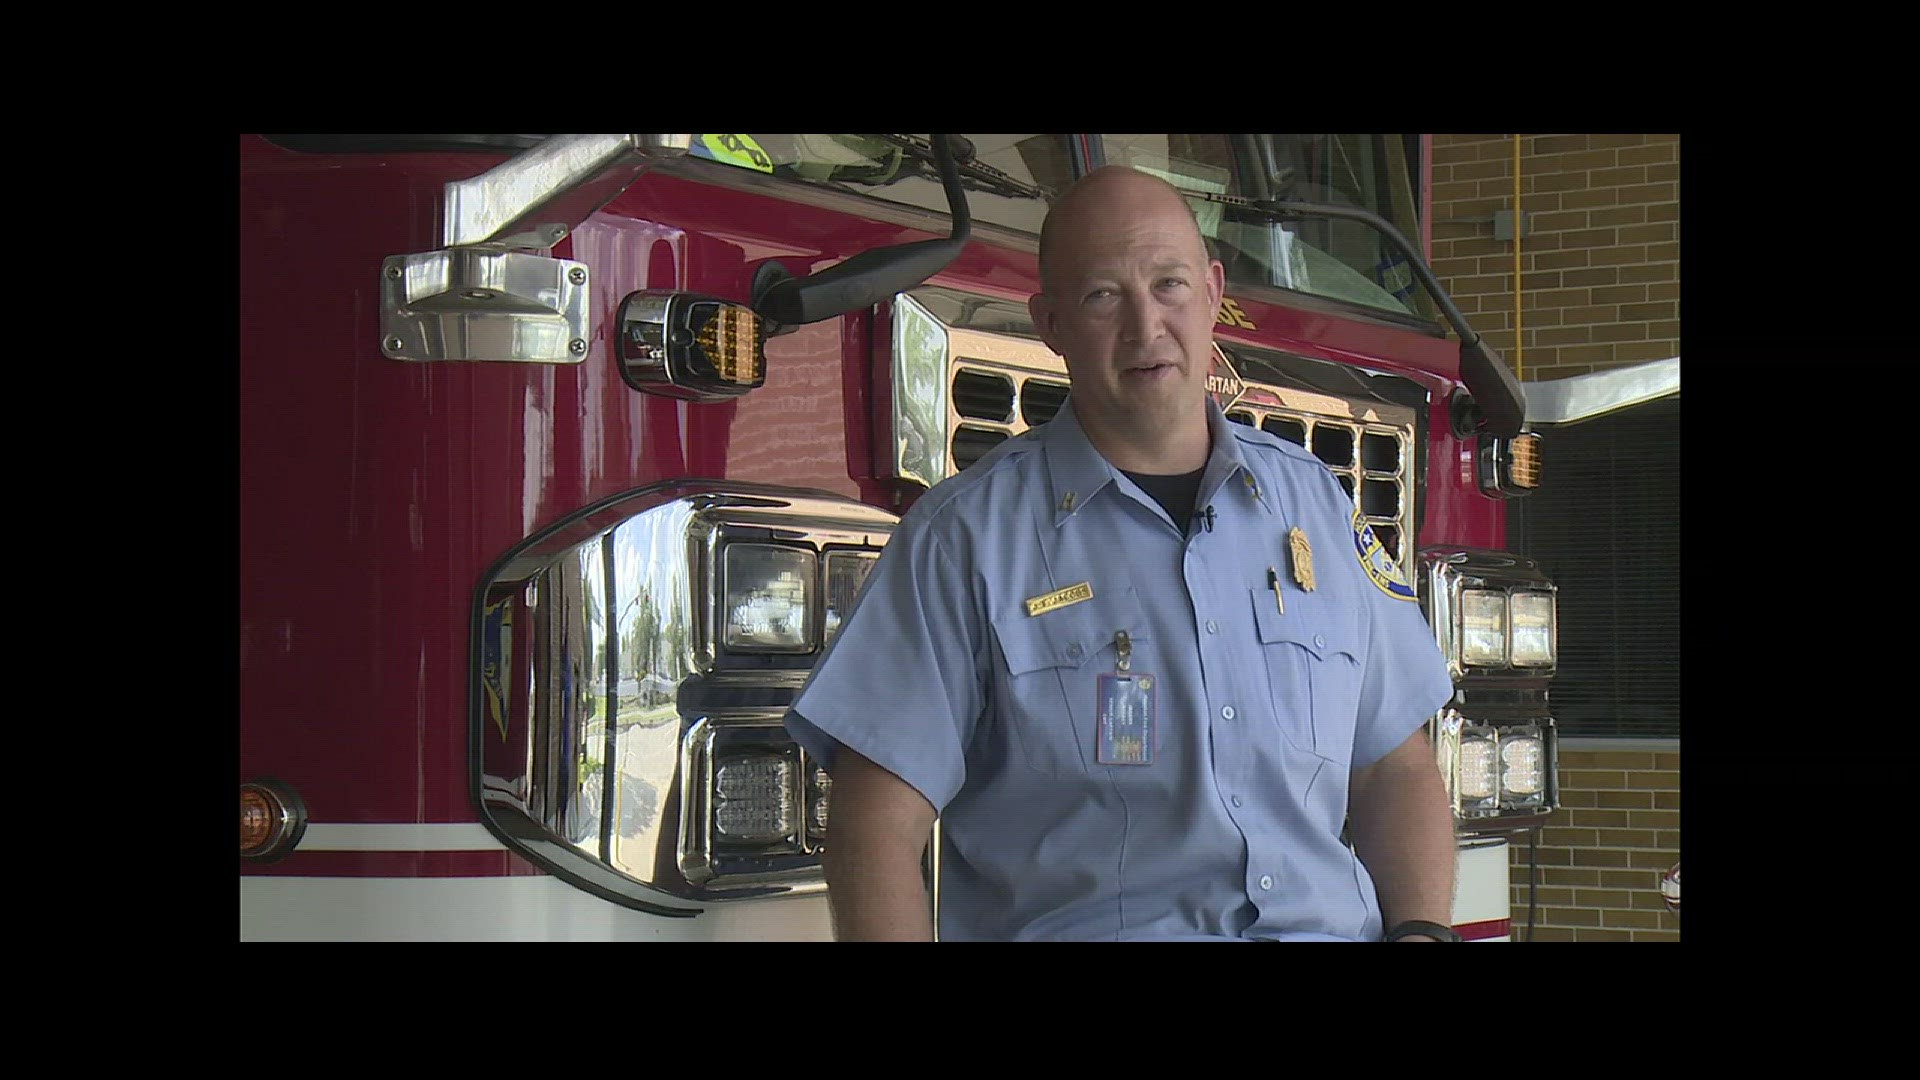 Captain Jeff Jacobs from Houston Fire Station 69 talks about what it was like being on Tower 69 which was used to move all of the Astros players through the victory parade on Friday.